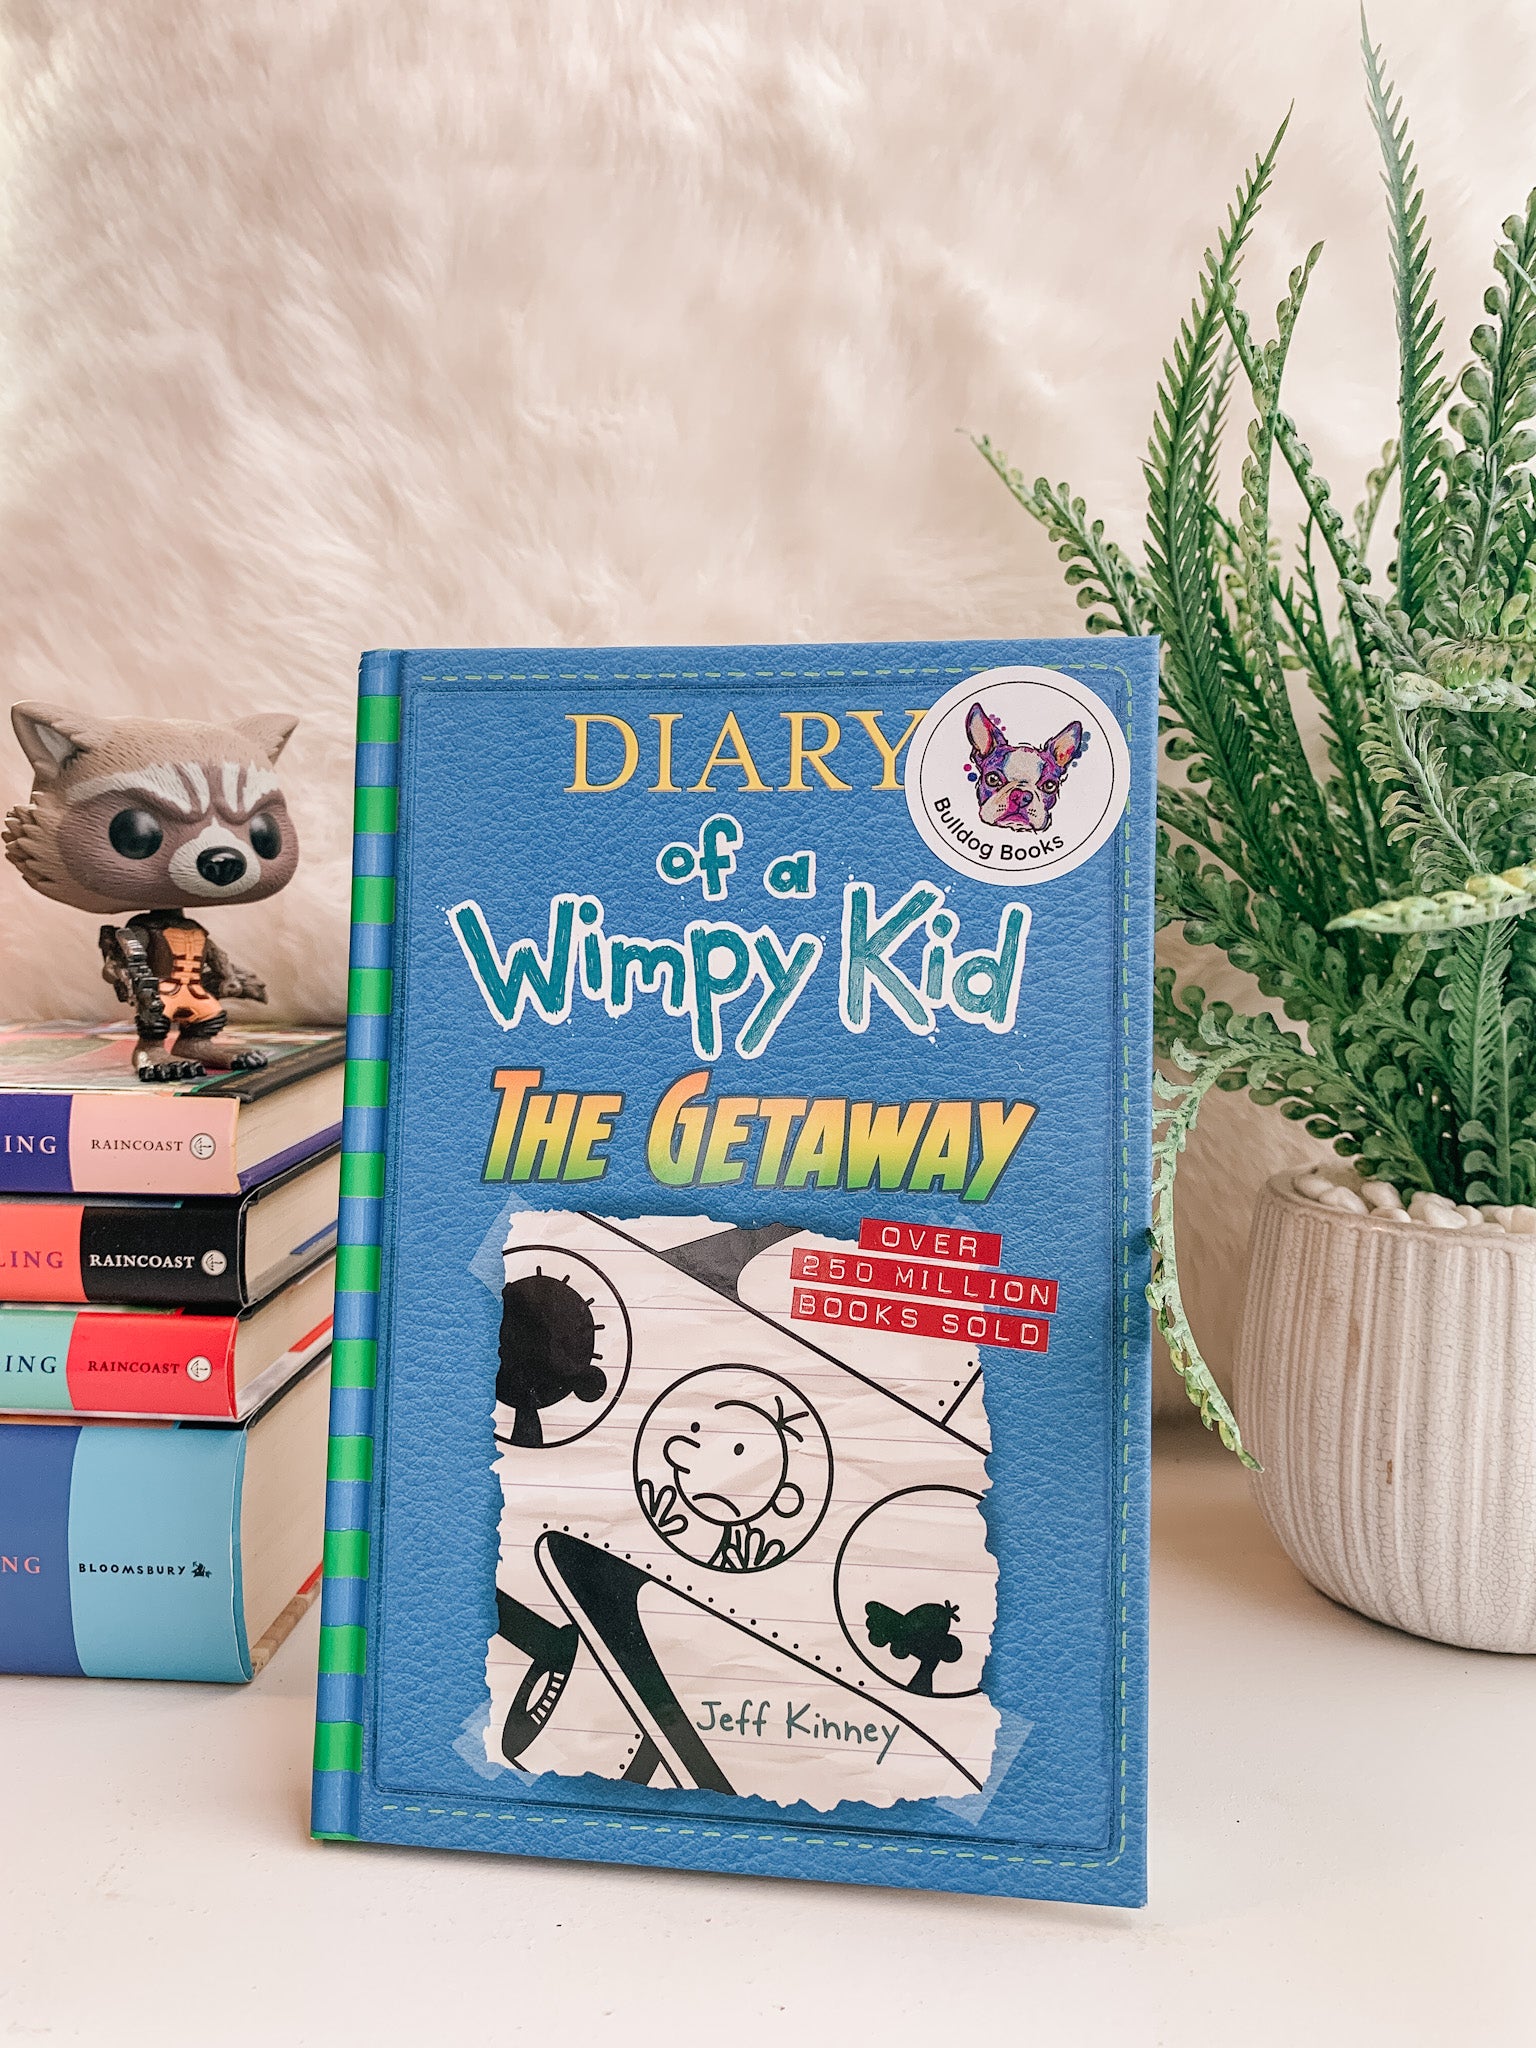 Of　(Book　A　Bulldog　Kid　Jeff　Wimpy　Getaway　Books　Kinney　The　by　12)　Diary　–